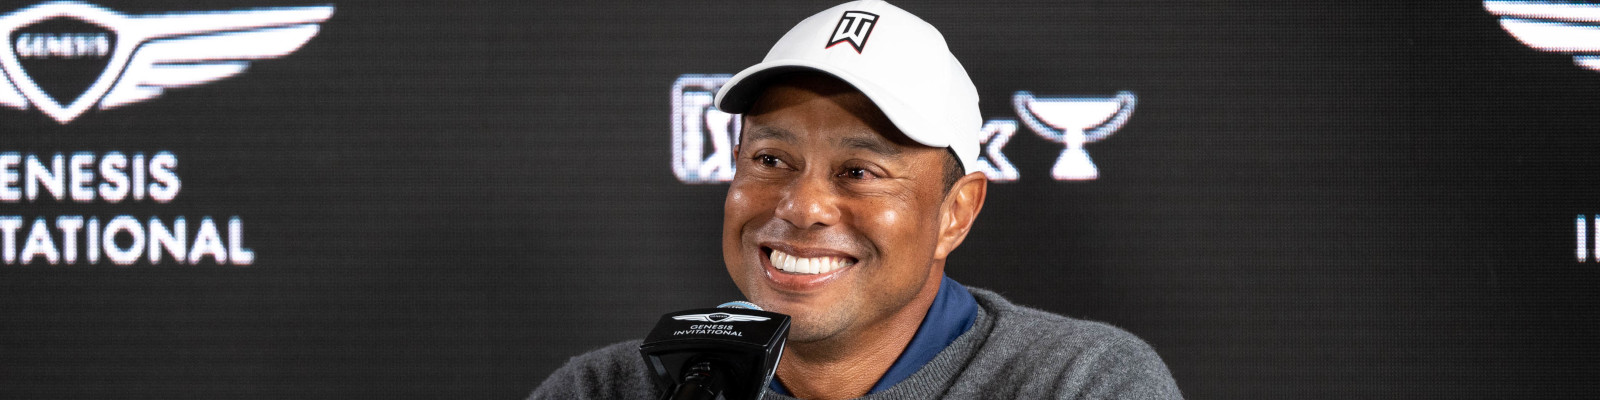 Tiger Woods (Photo by Getty Images)